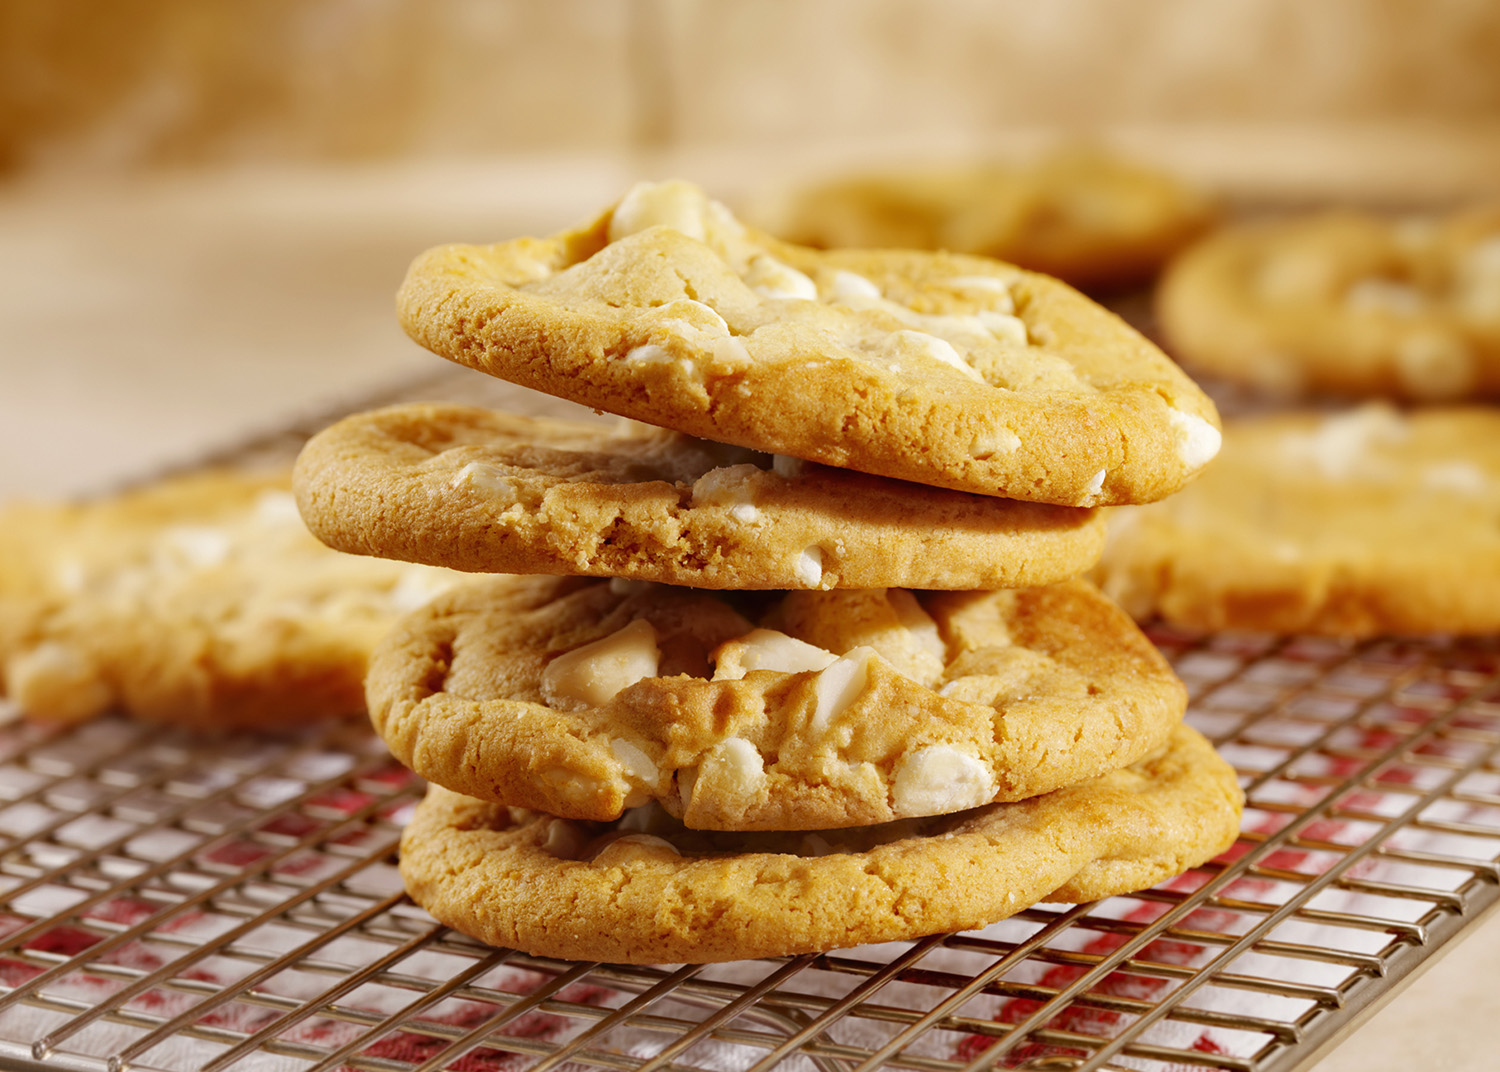 Homemade Macadamia Nut and White Chocolate Cookies Cooling  -Photographed on Hasselblad H3D2-39mb Camera